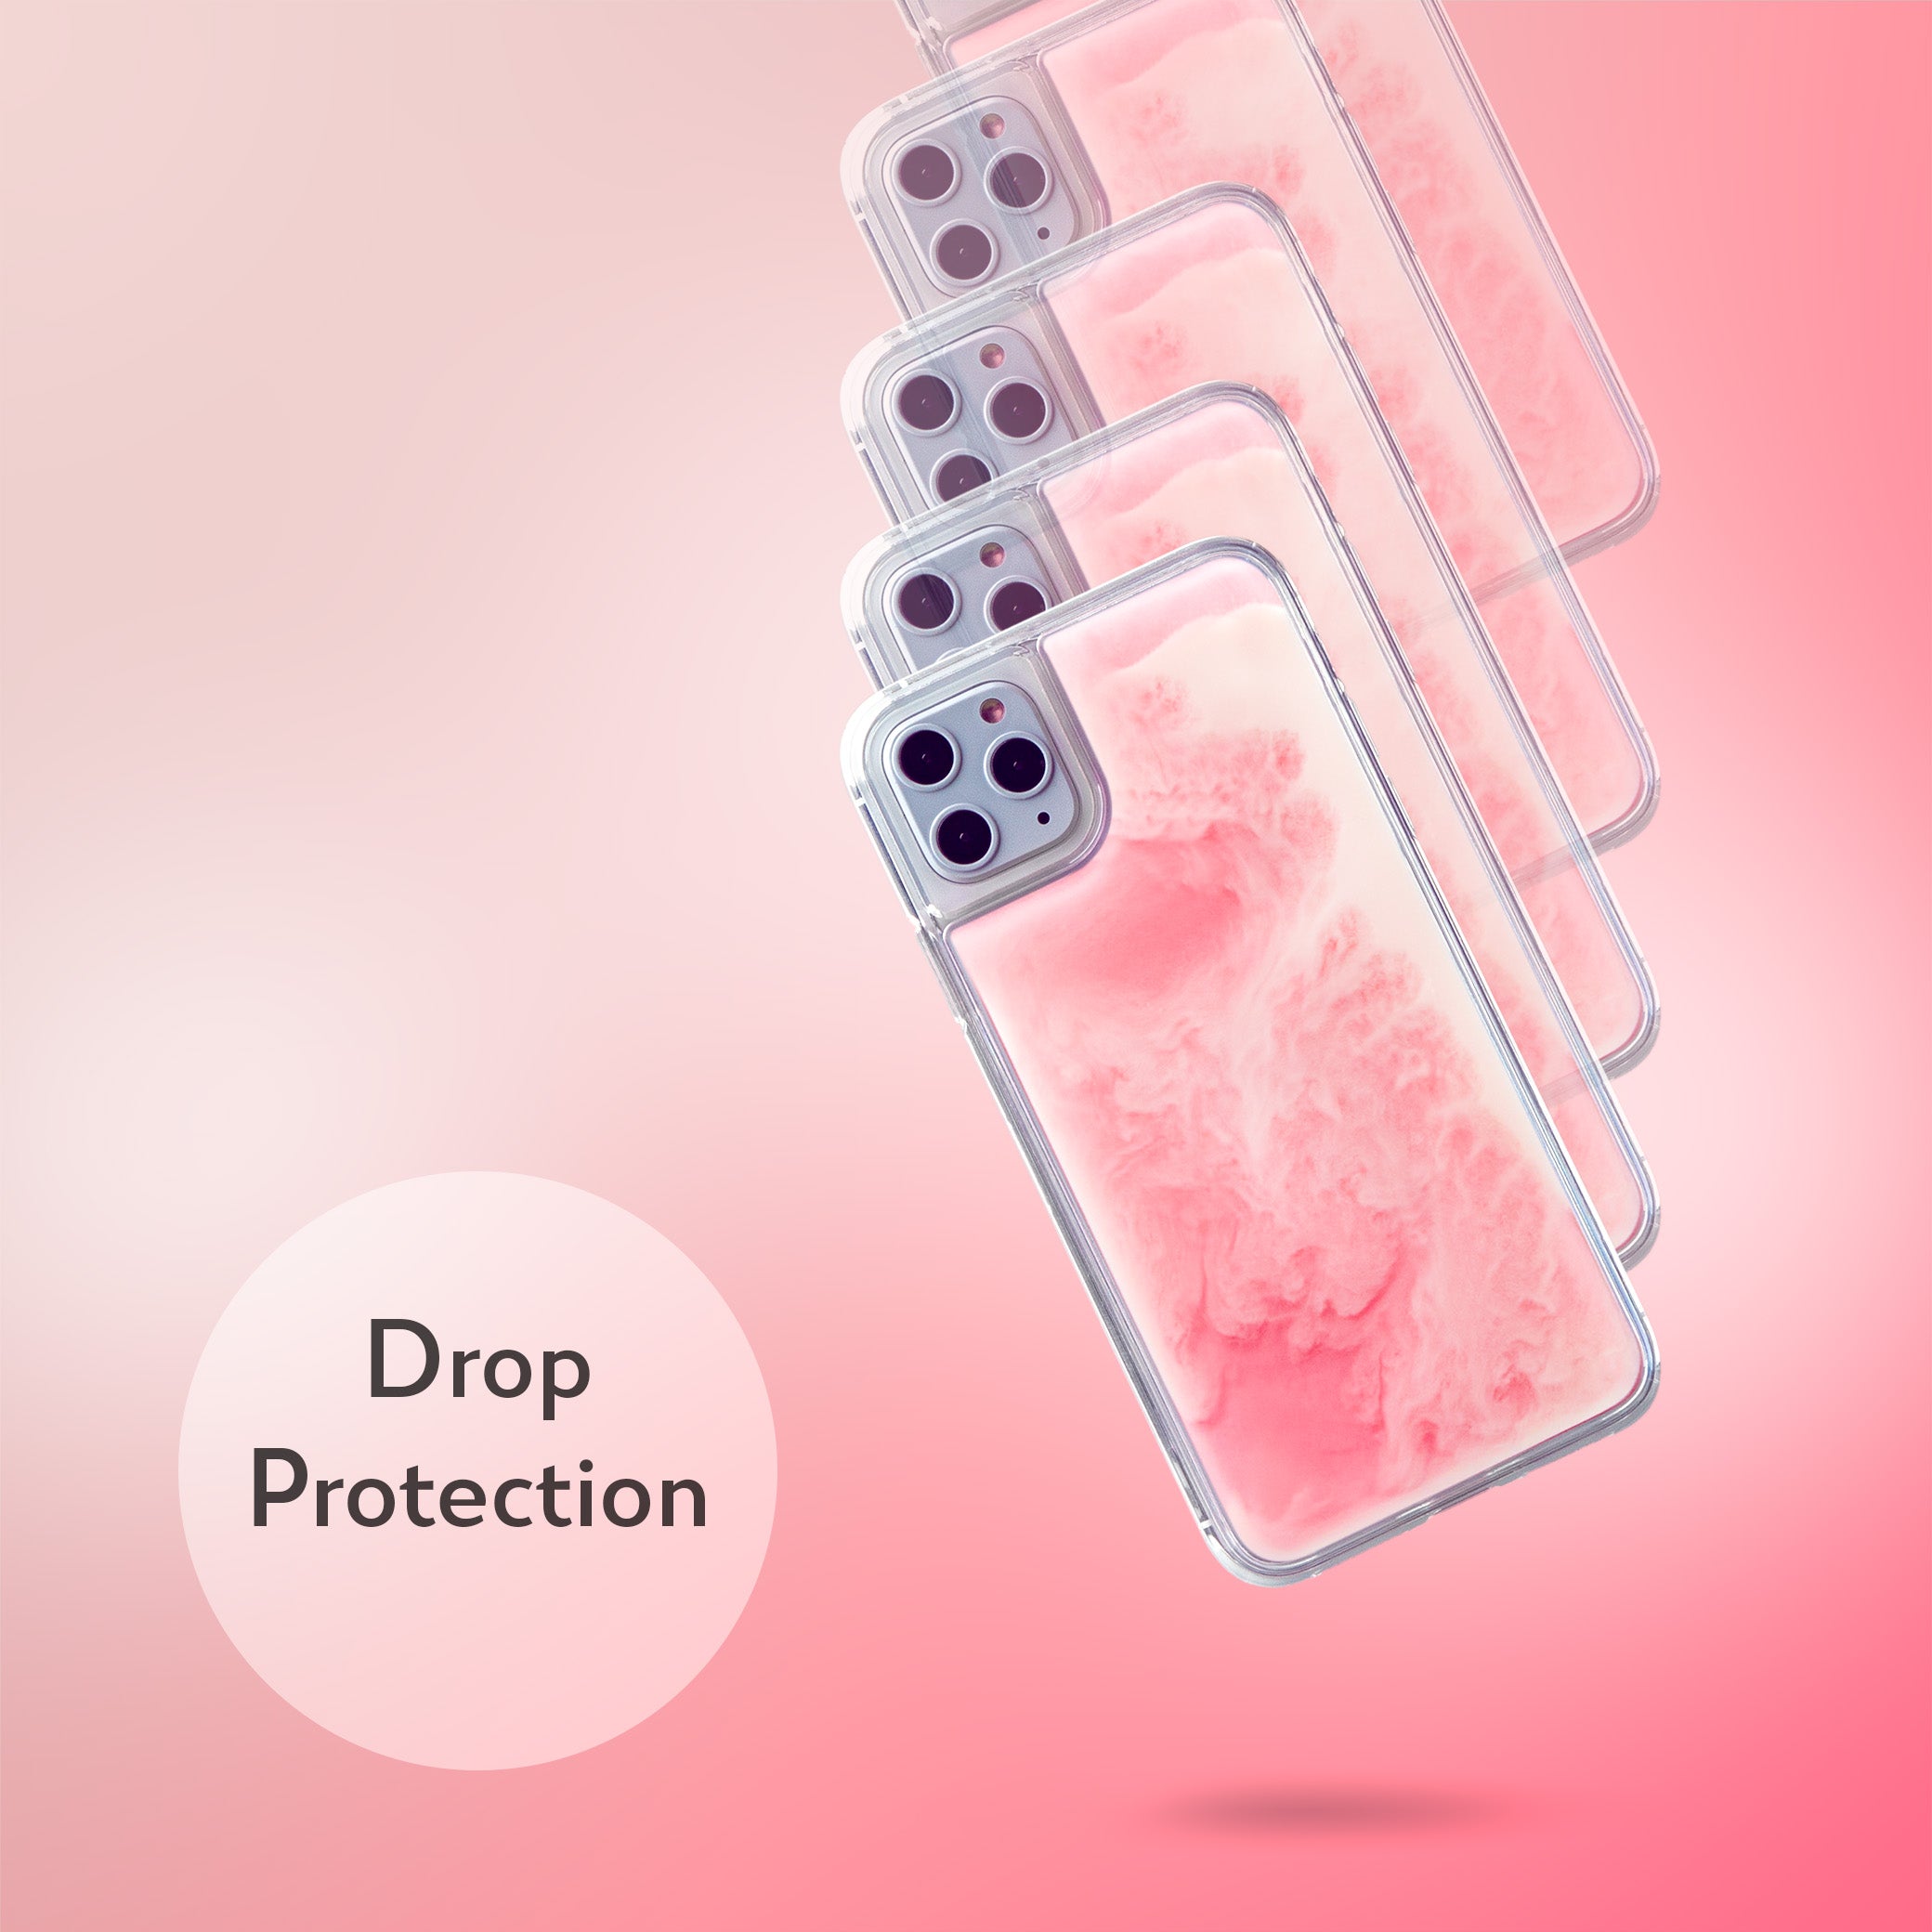 Neon Sand Case for iPhone 11 Pro Max - Pink Peach n Sand